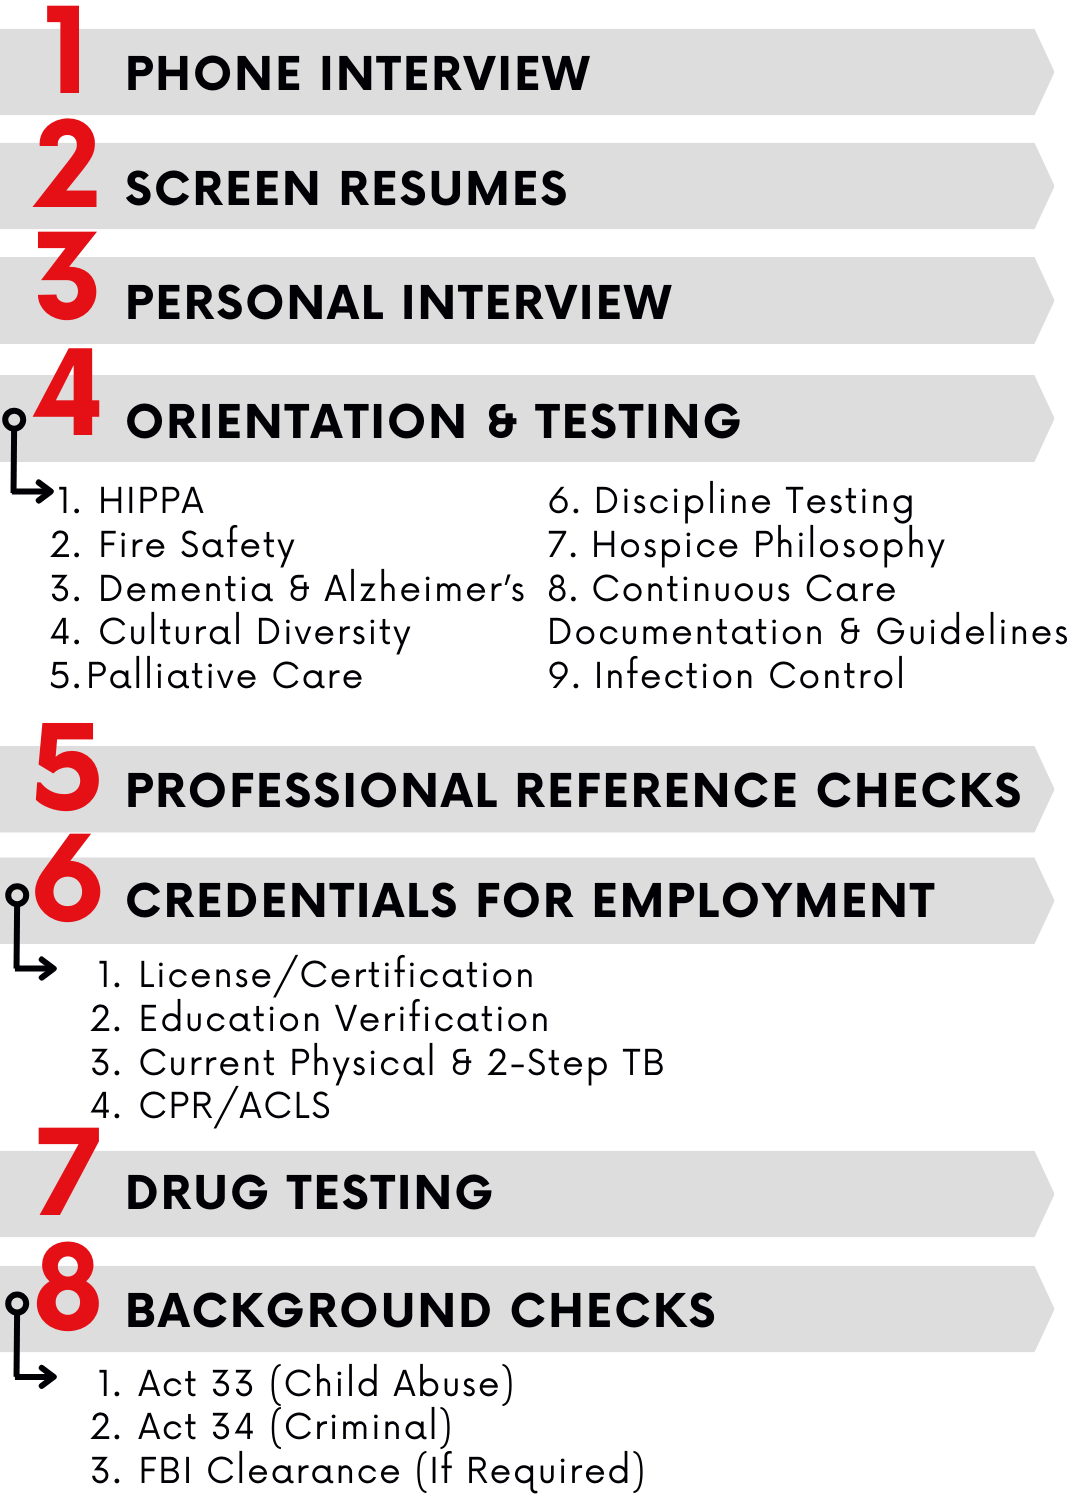 1. Phone Interview 2. Screen Resumes 3. Personal Interview 4. Orientation And Testing 5. Professional Reference Checks 6. Credentials For Employment 7. Drug Testing 8. Background Checks